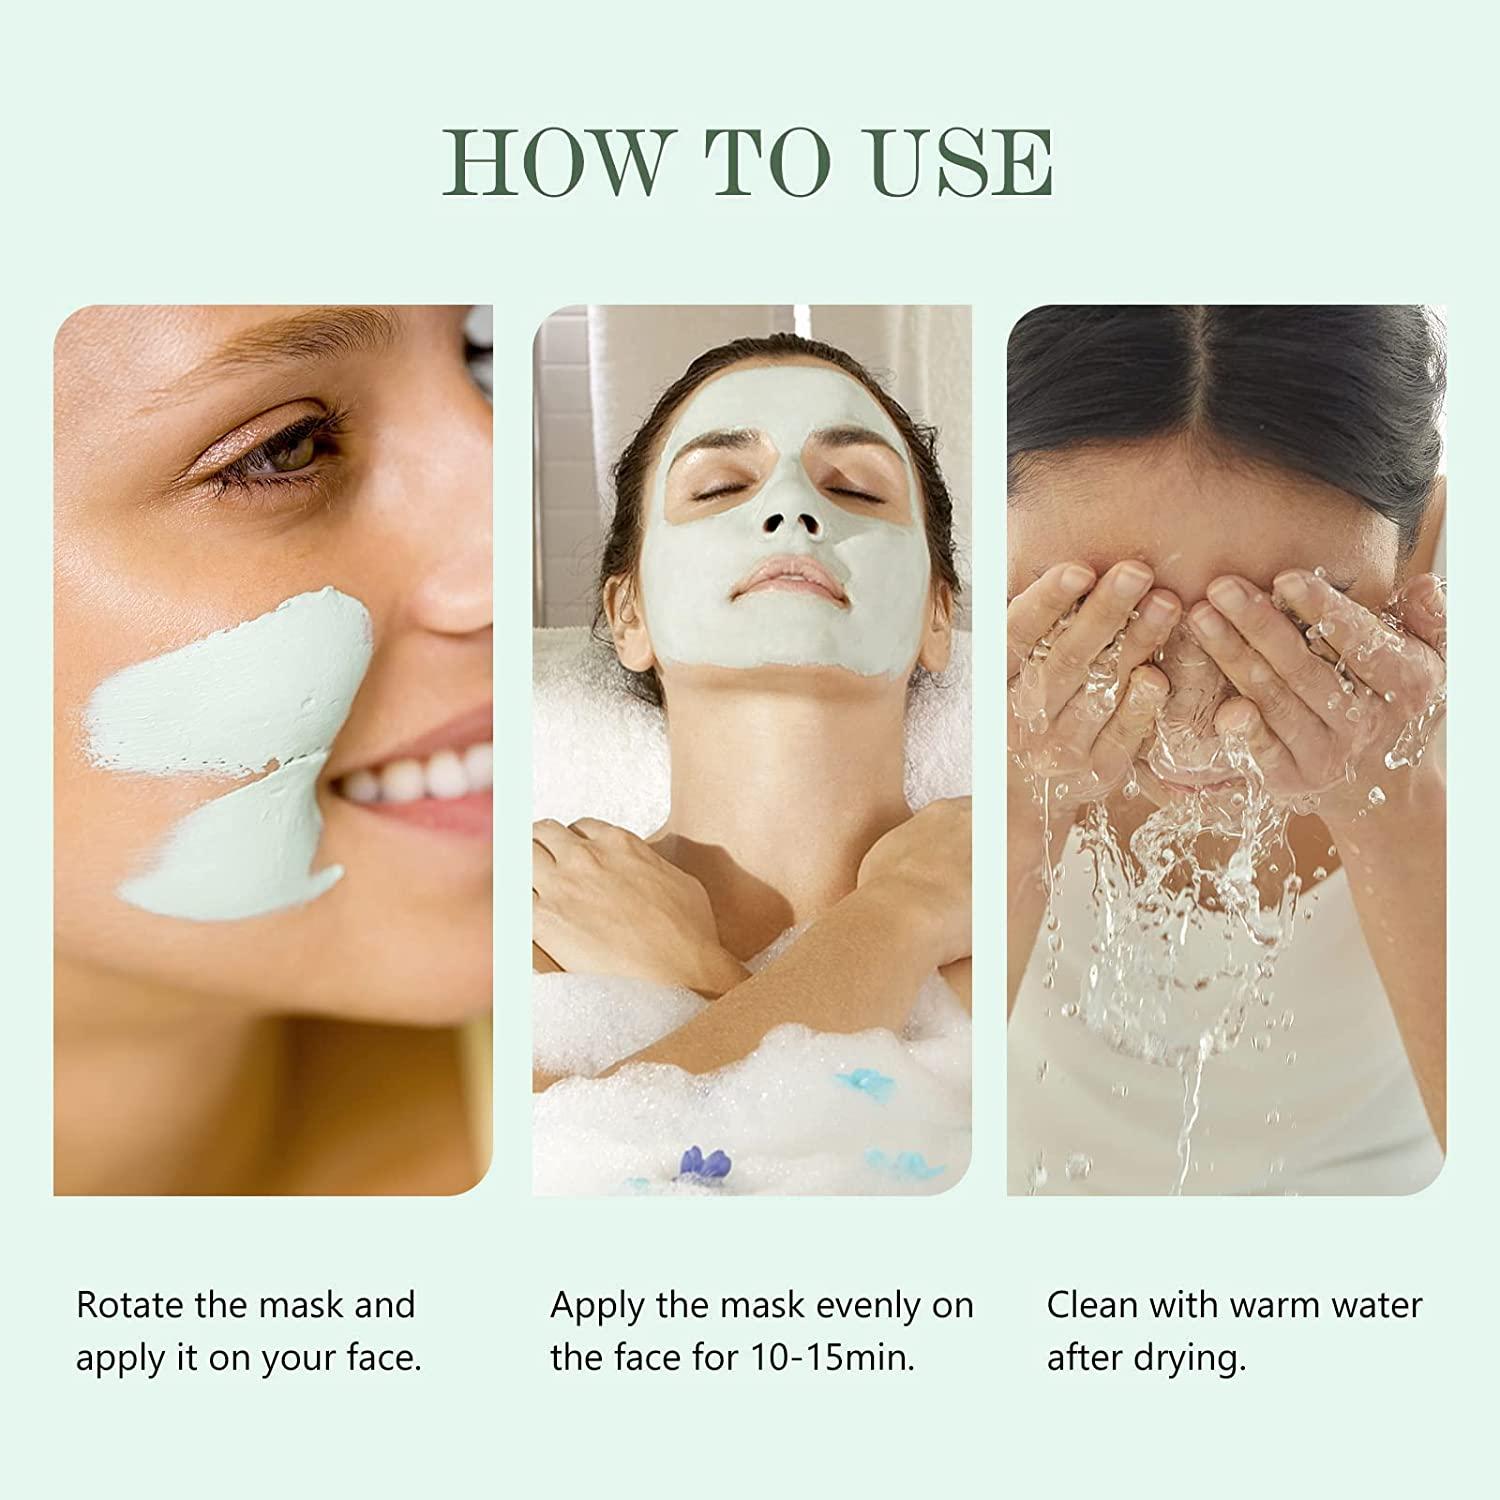 Green Tea Stick Mask - Purifying Clay Mask for All Skin Types, Oil Control  & Deep Pore Cleansing